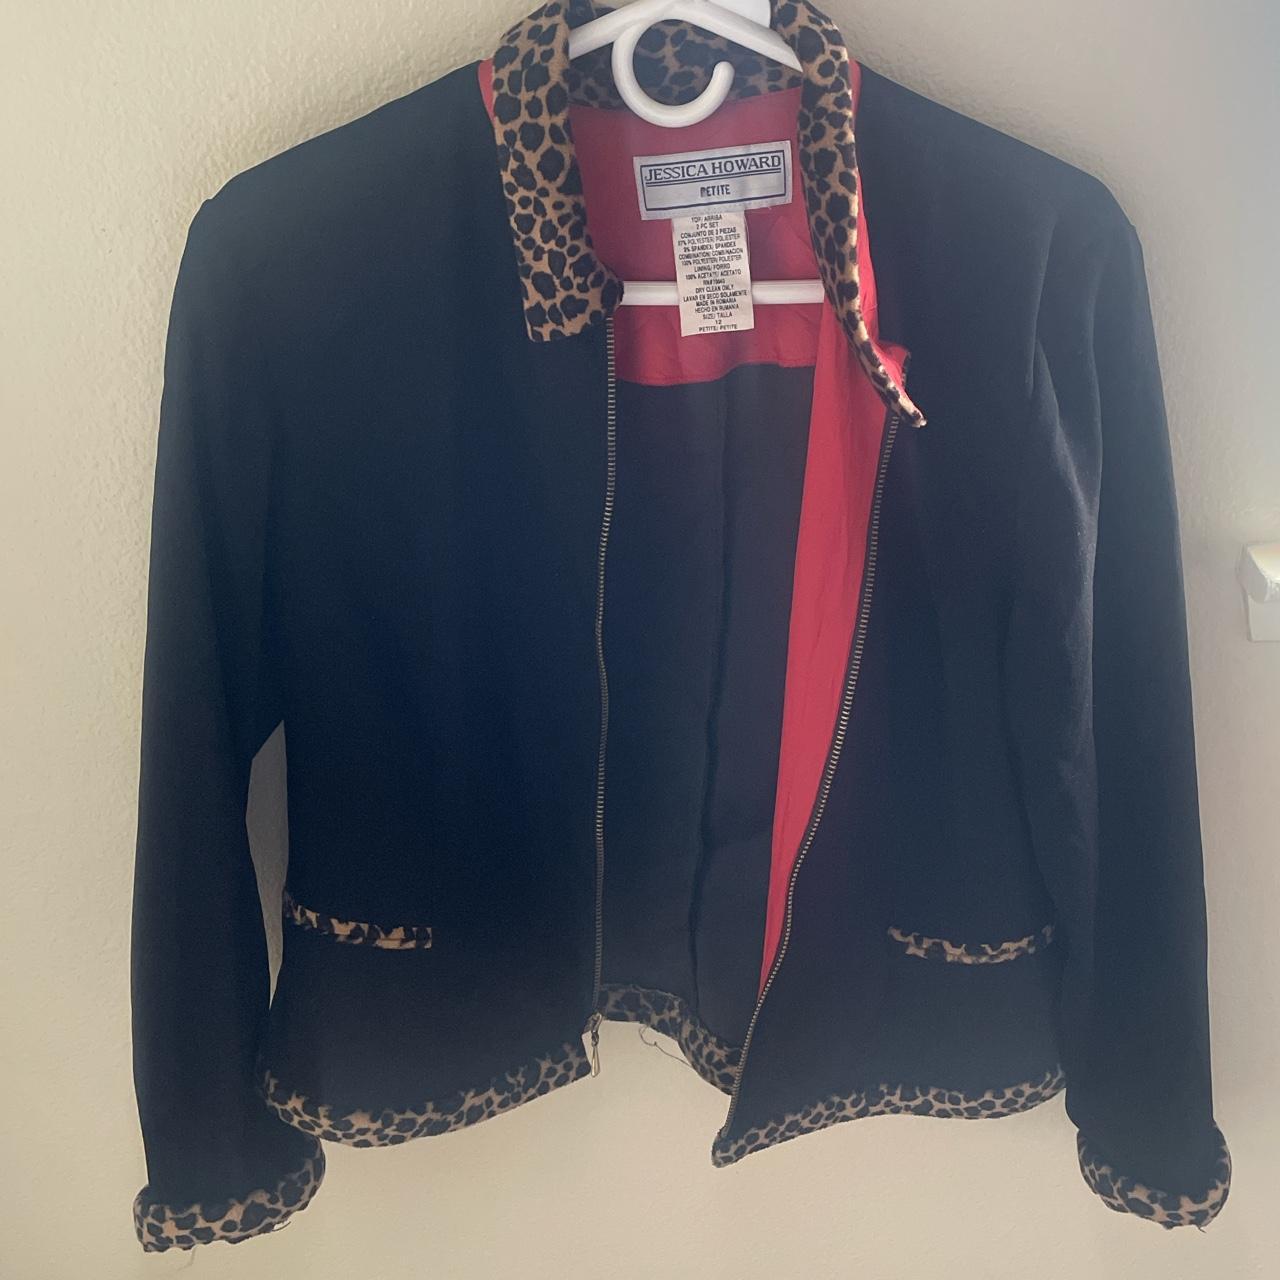 Jessica Howard Women's Black and Red Jacket